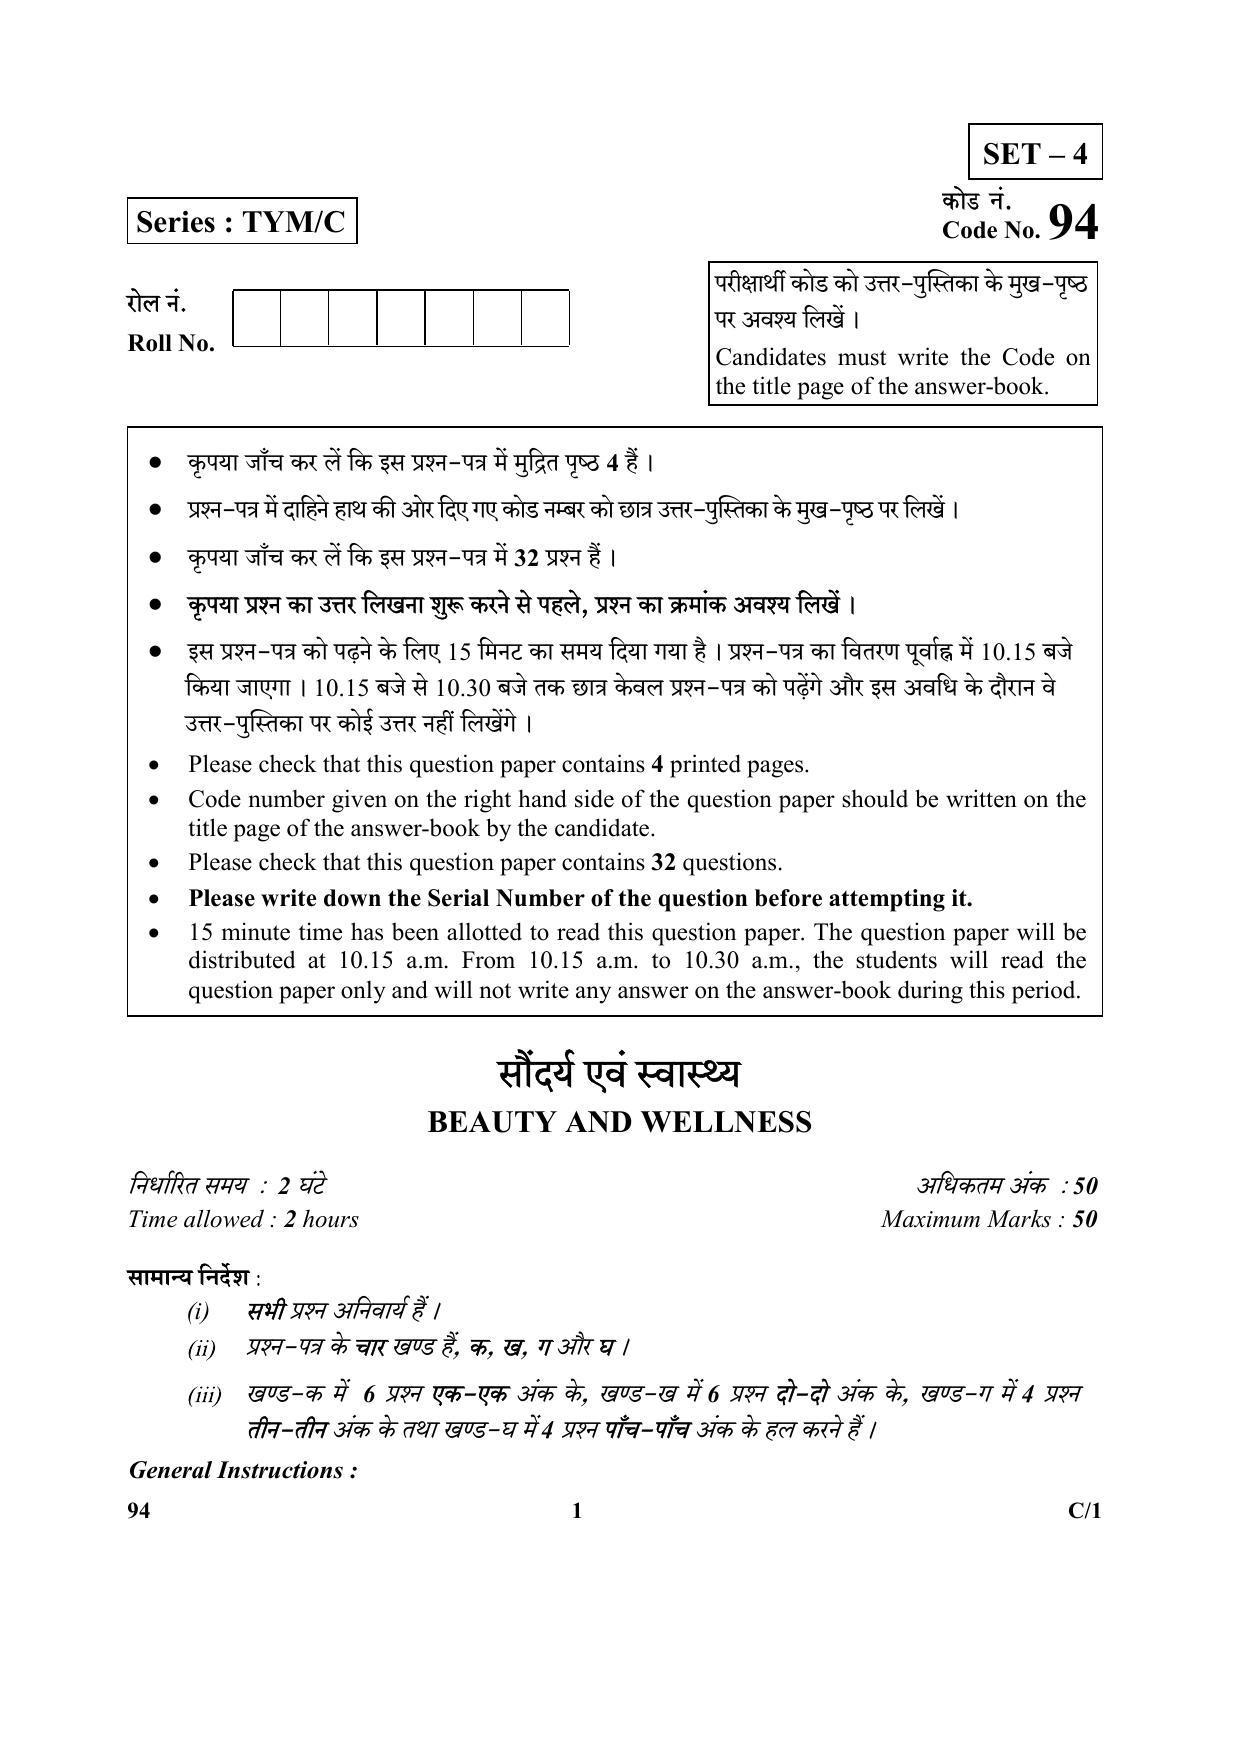 CBSE Class 10 94 (Beauty And Wellness) 2018 Compartment Question Paper - Page 1